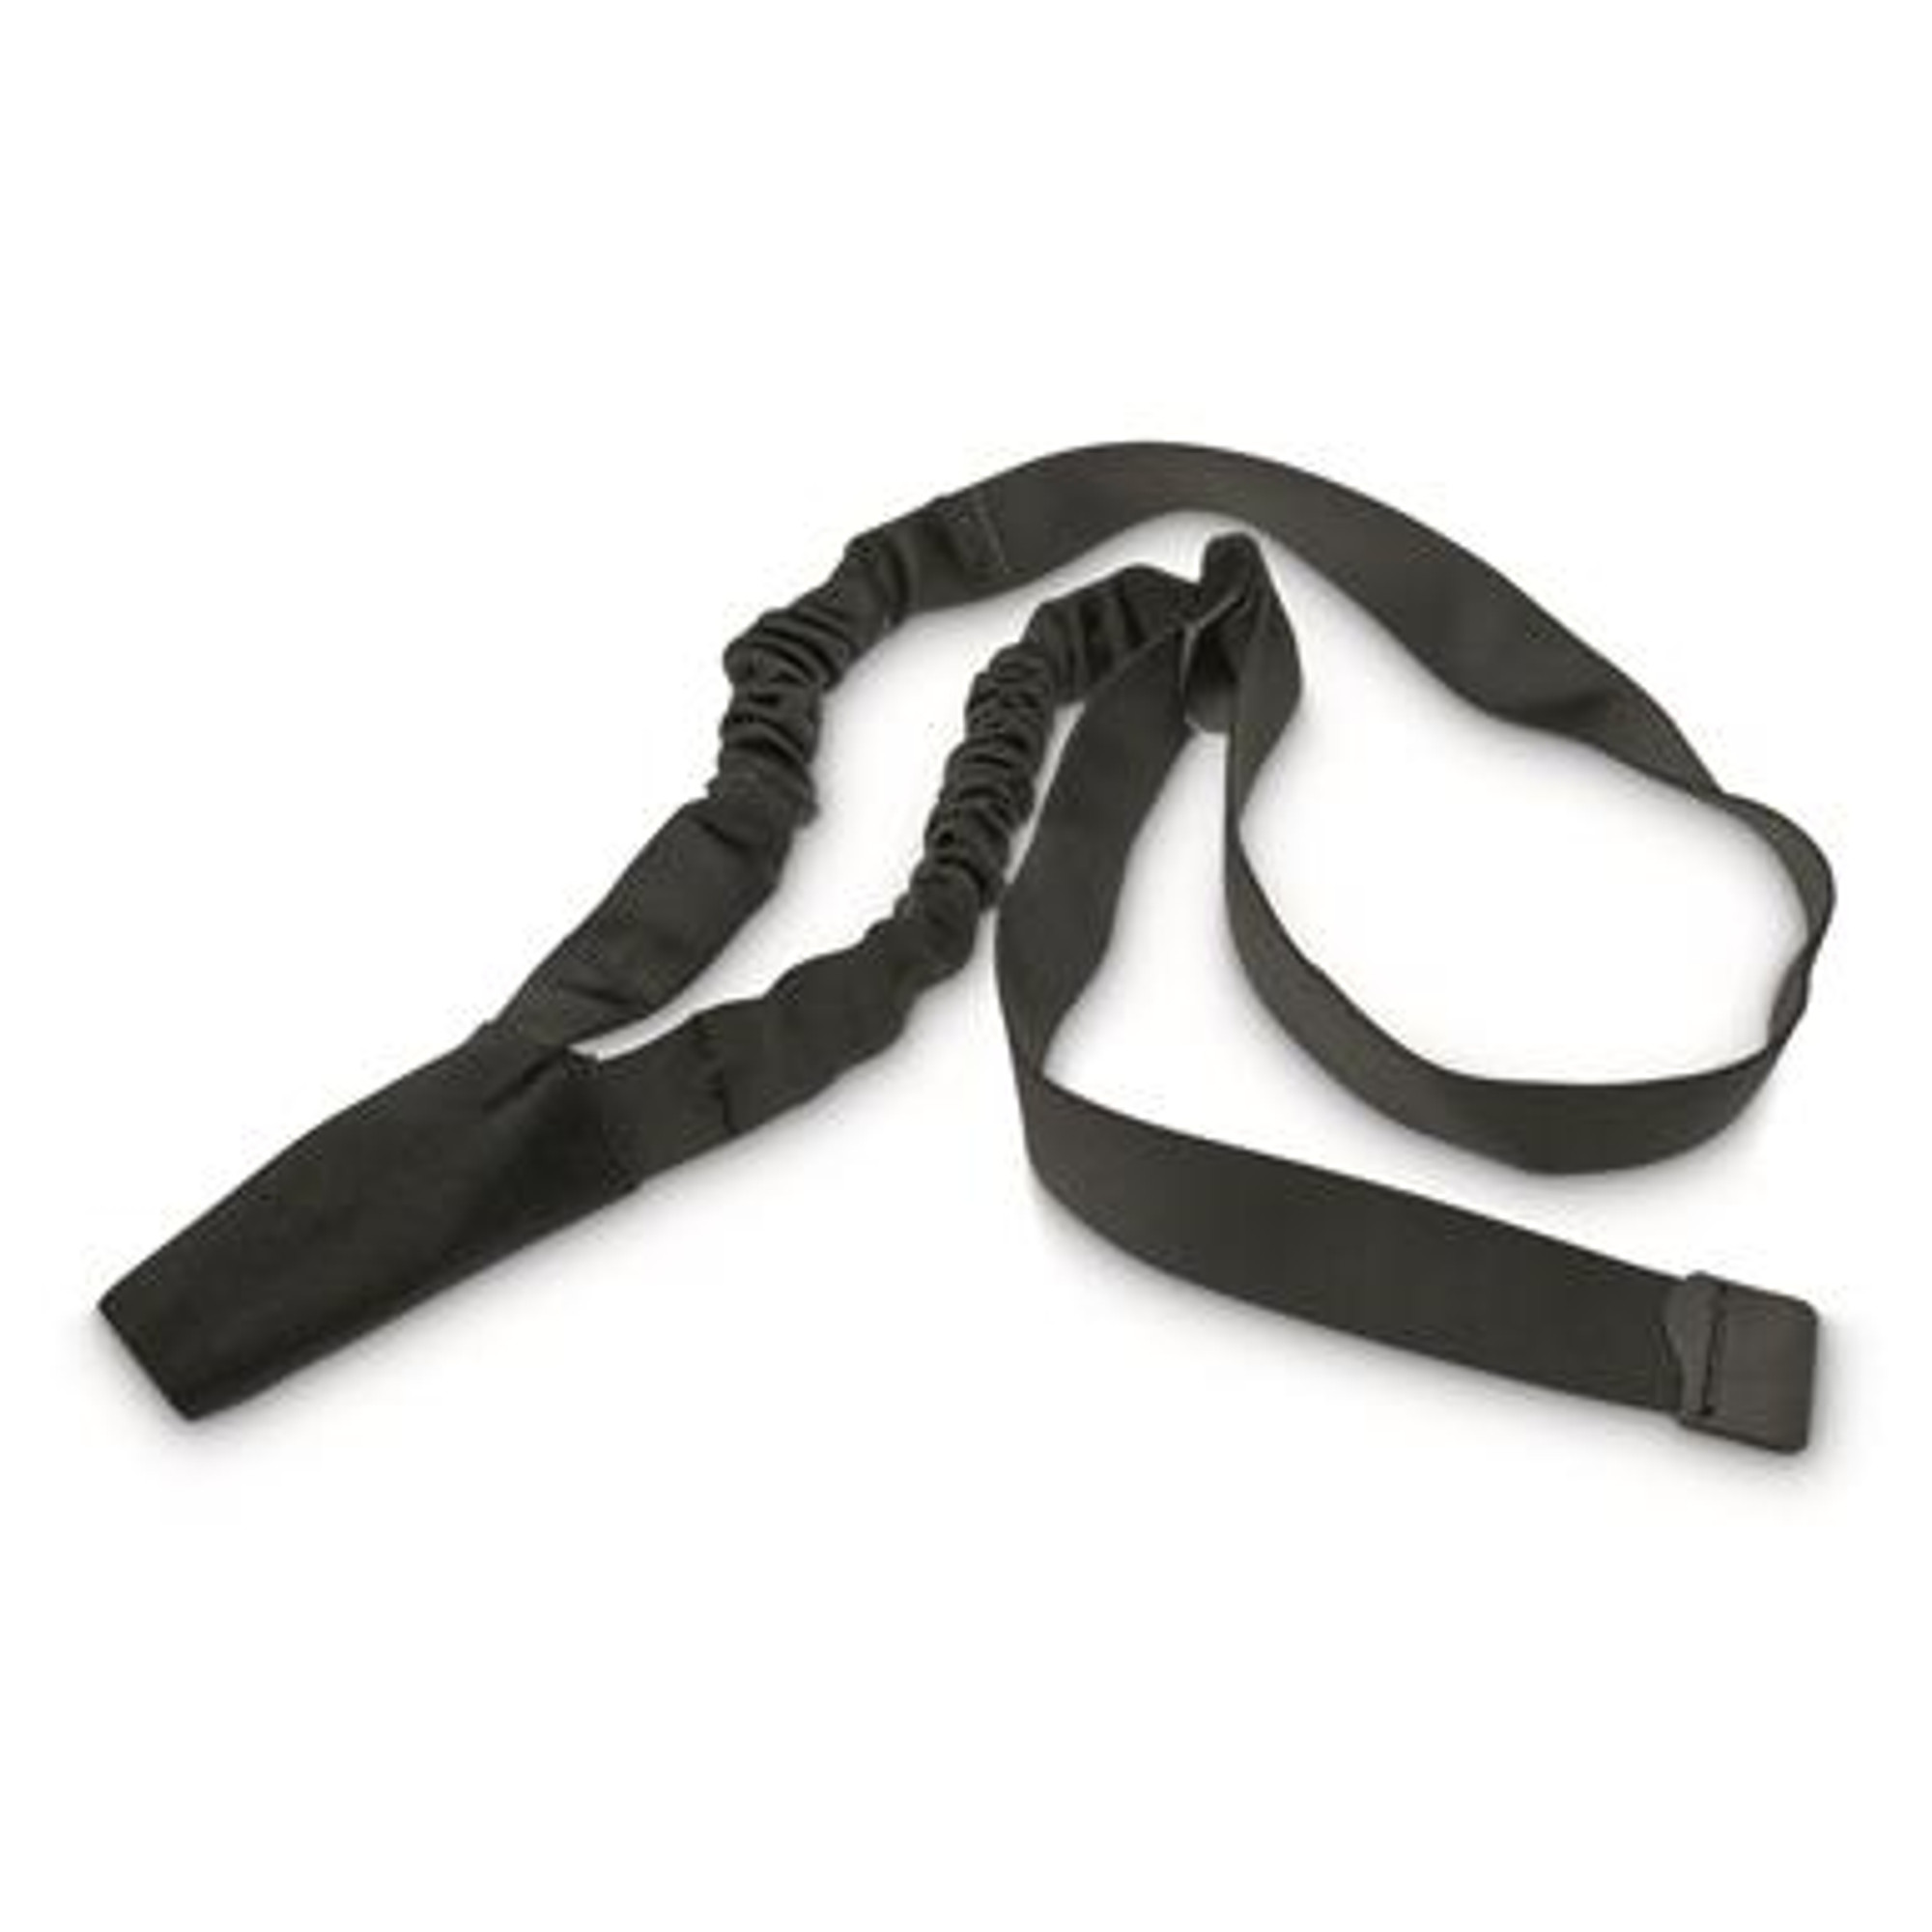 FAB Defense One Point Bungee Sling